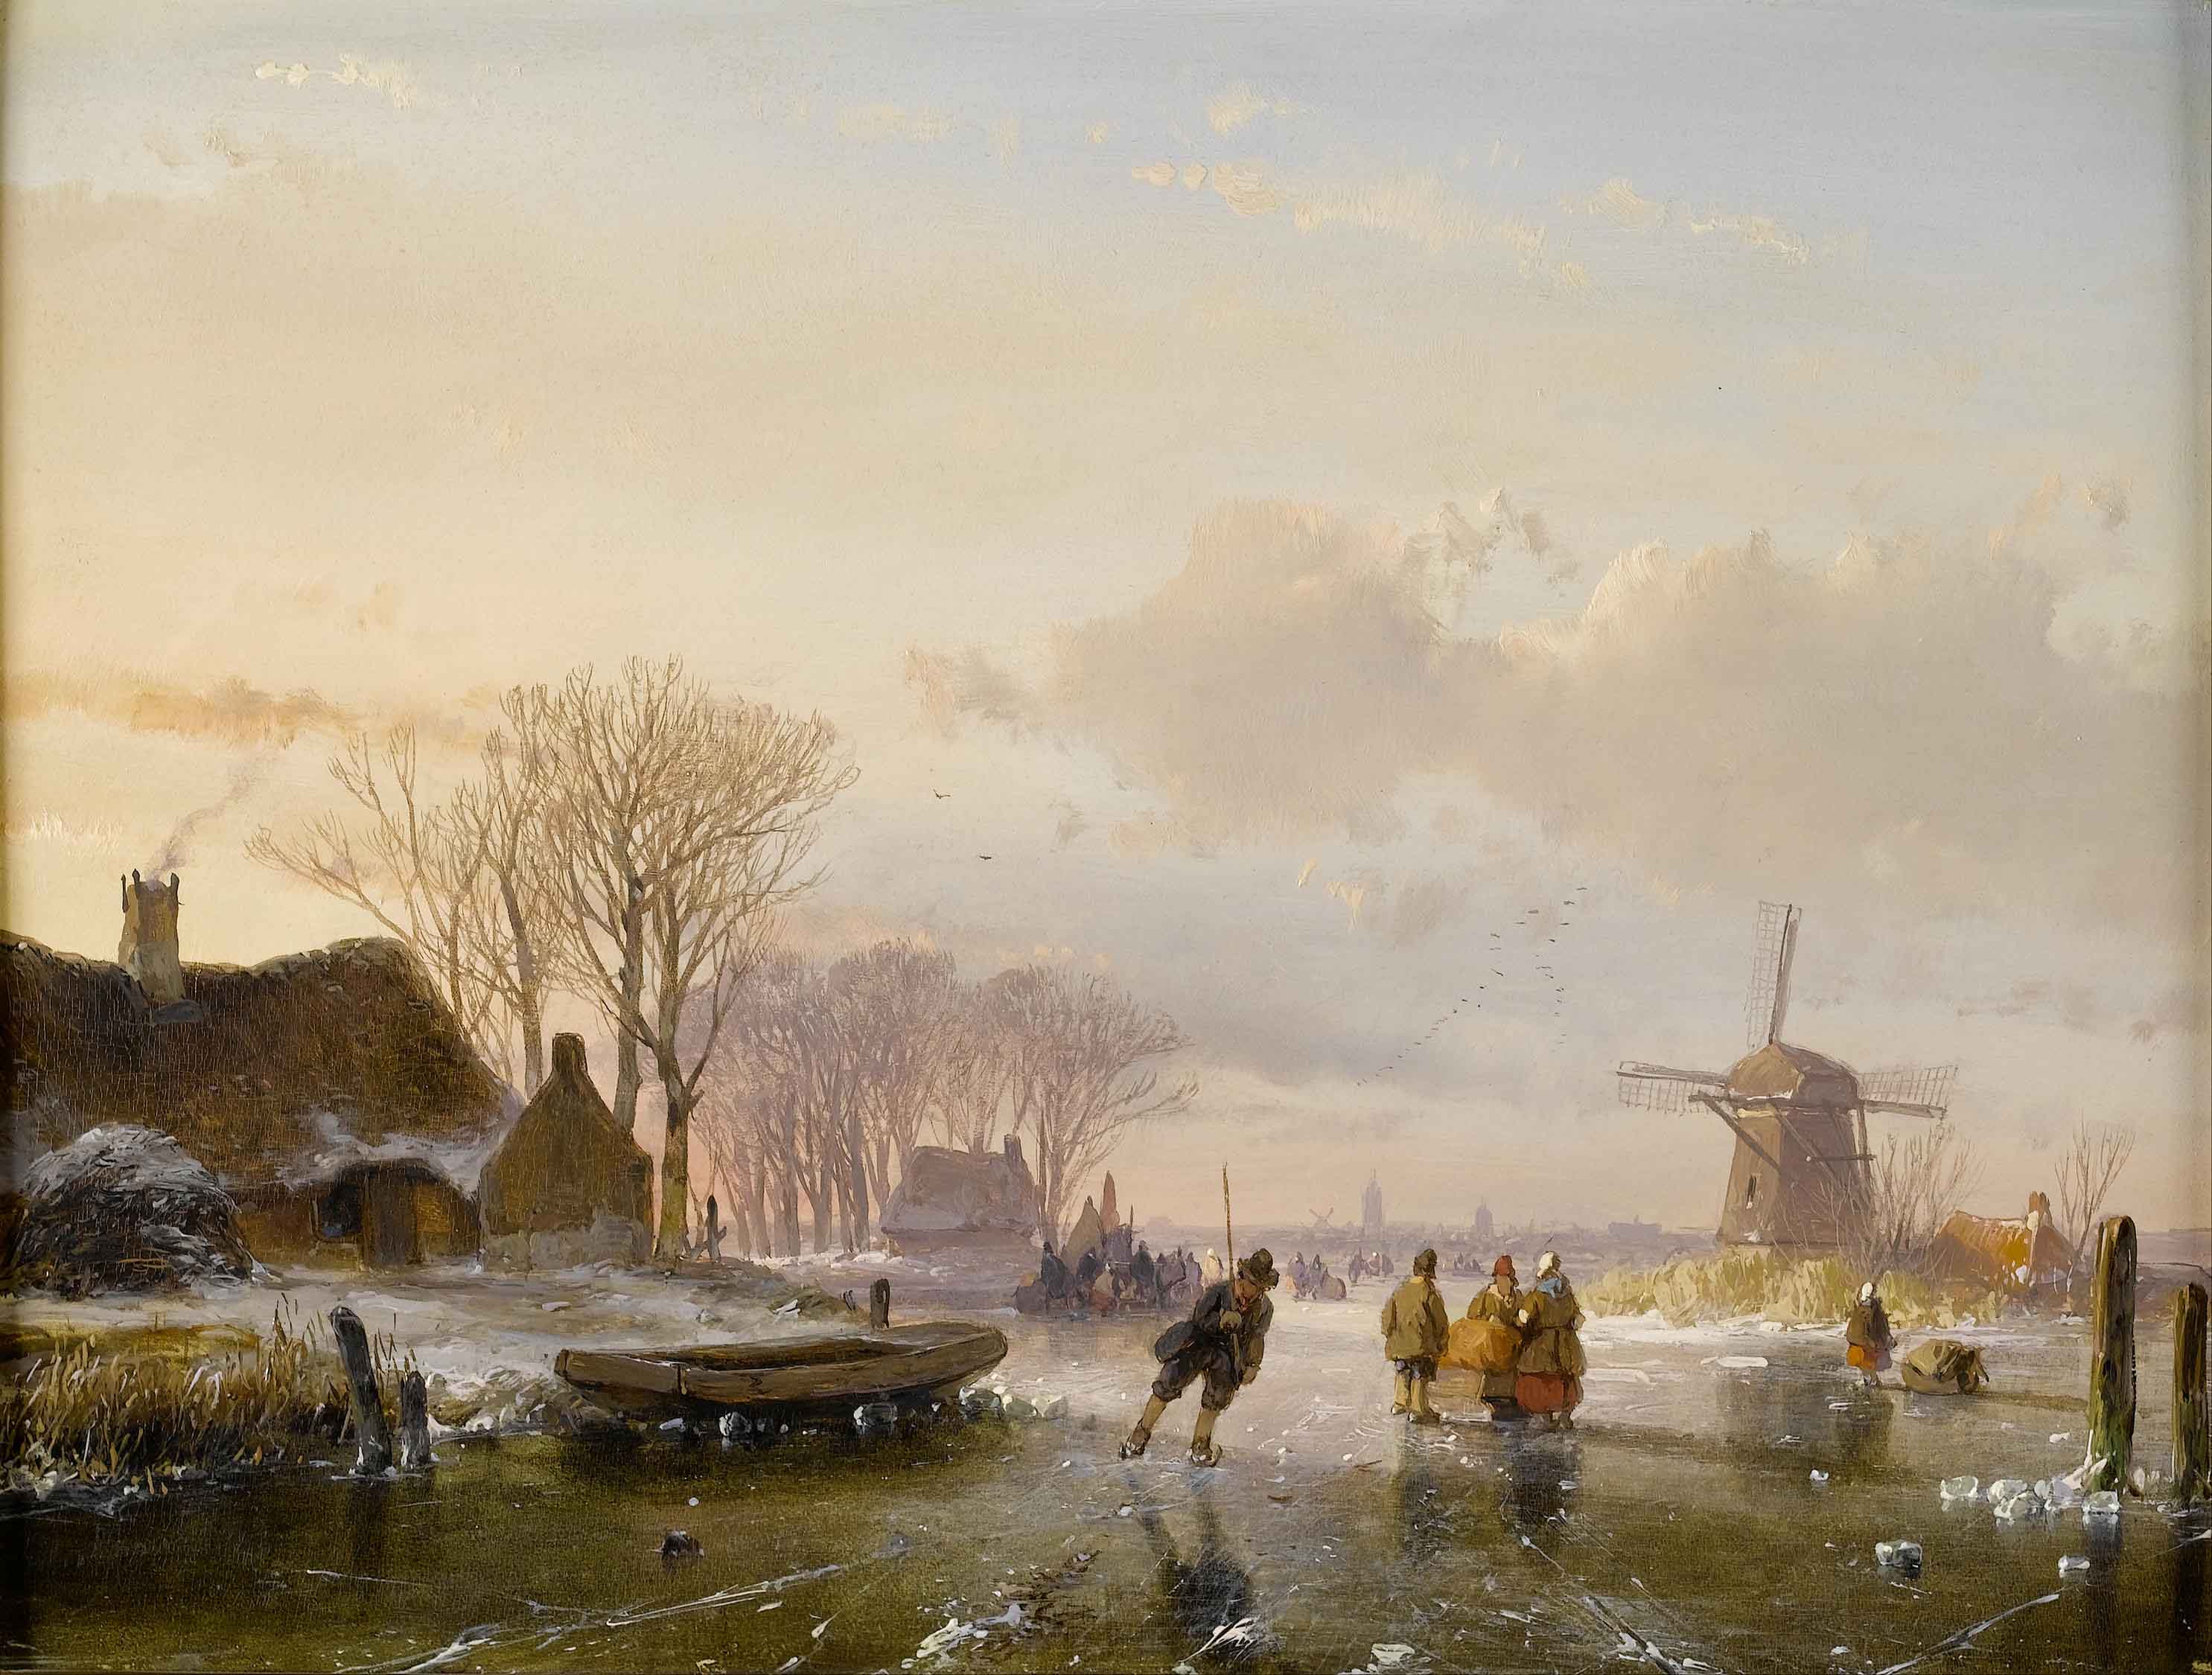 Skaters and figures on a frozen river